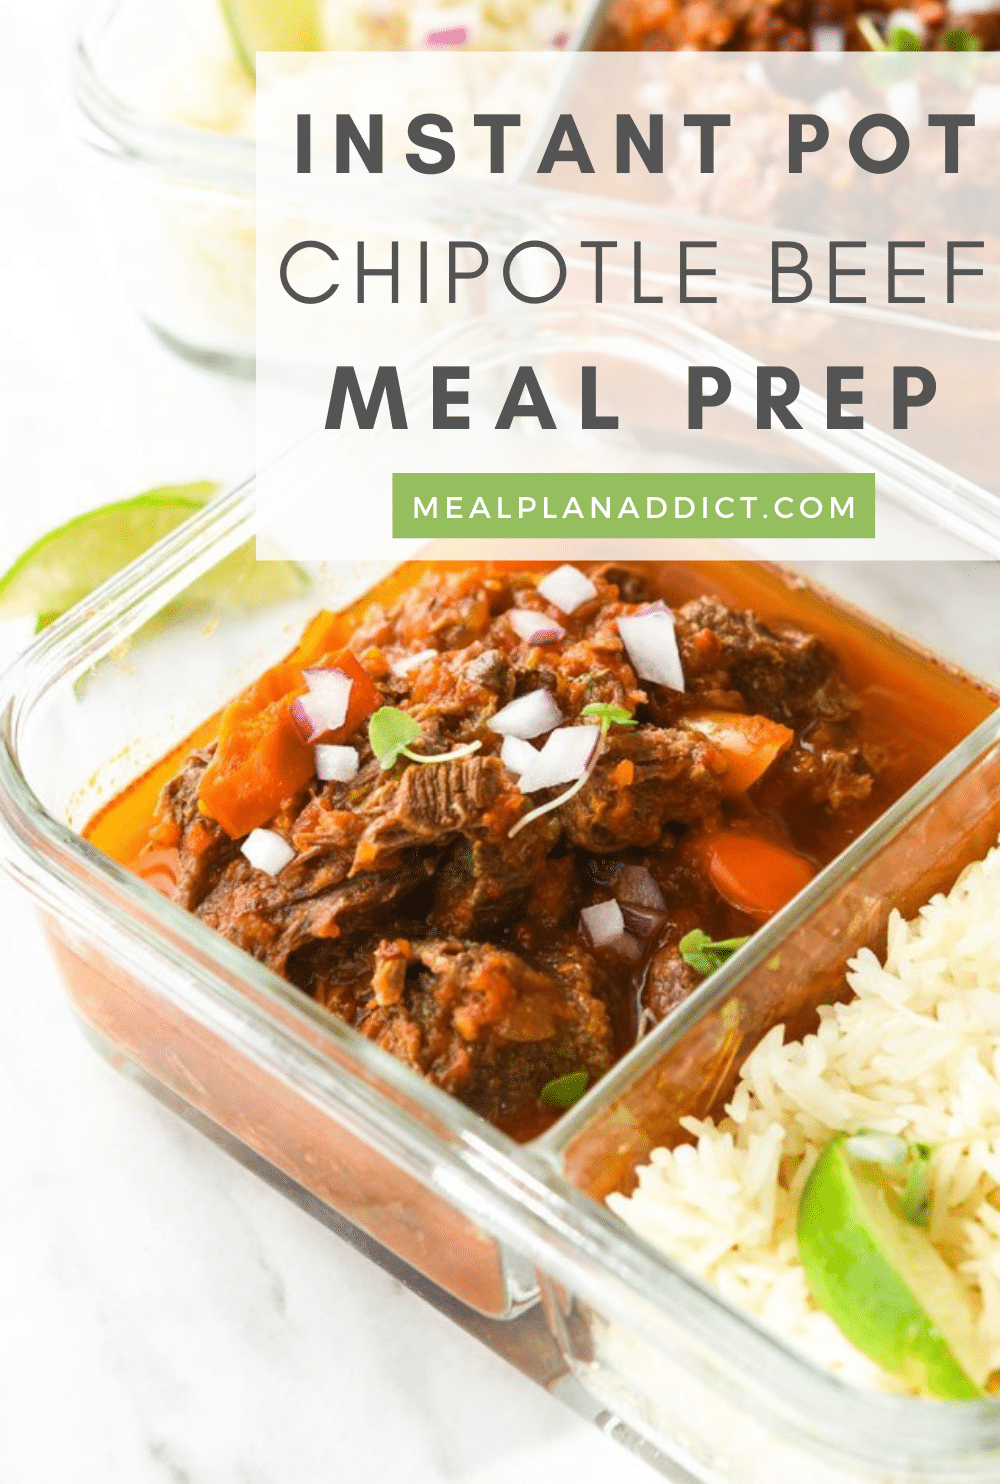 Chipotle Beef pin for Pinterest